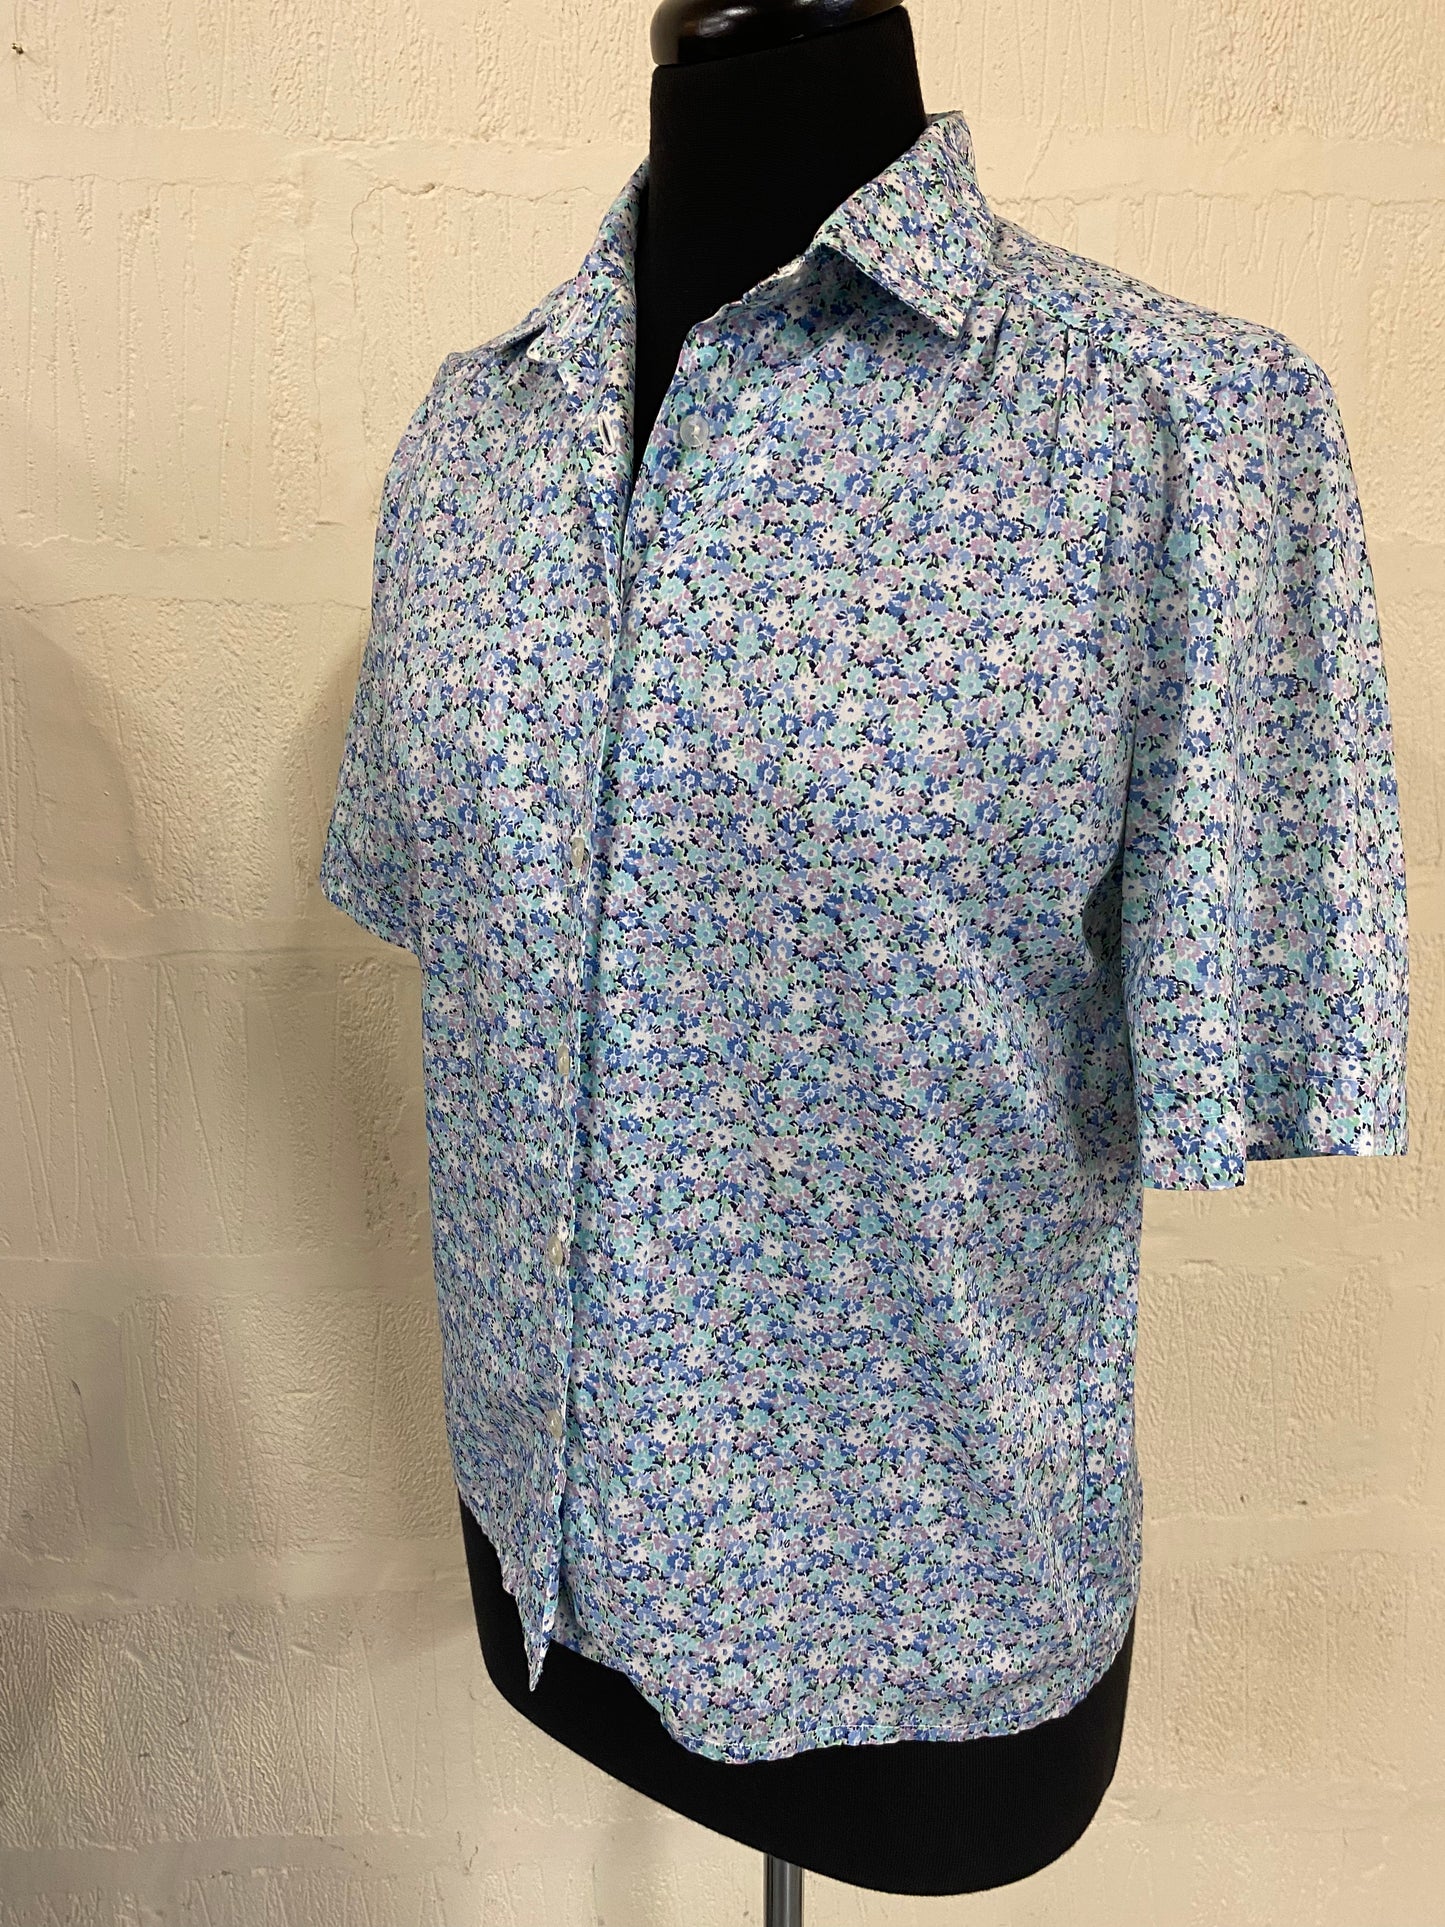 Vintage Made in England Ditsy Print Blue and White Blouse Size 12